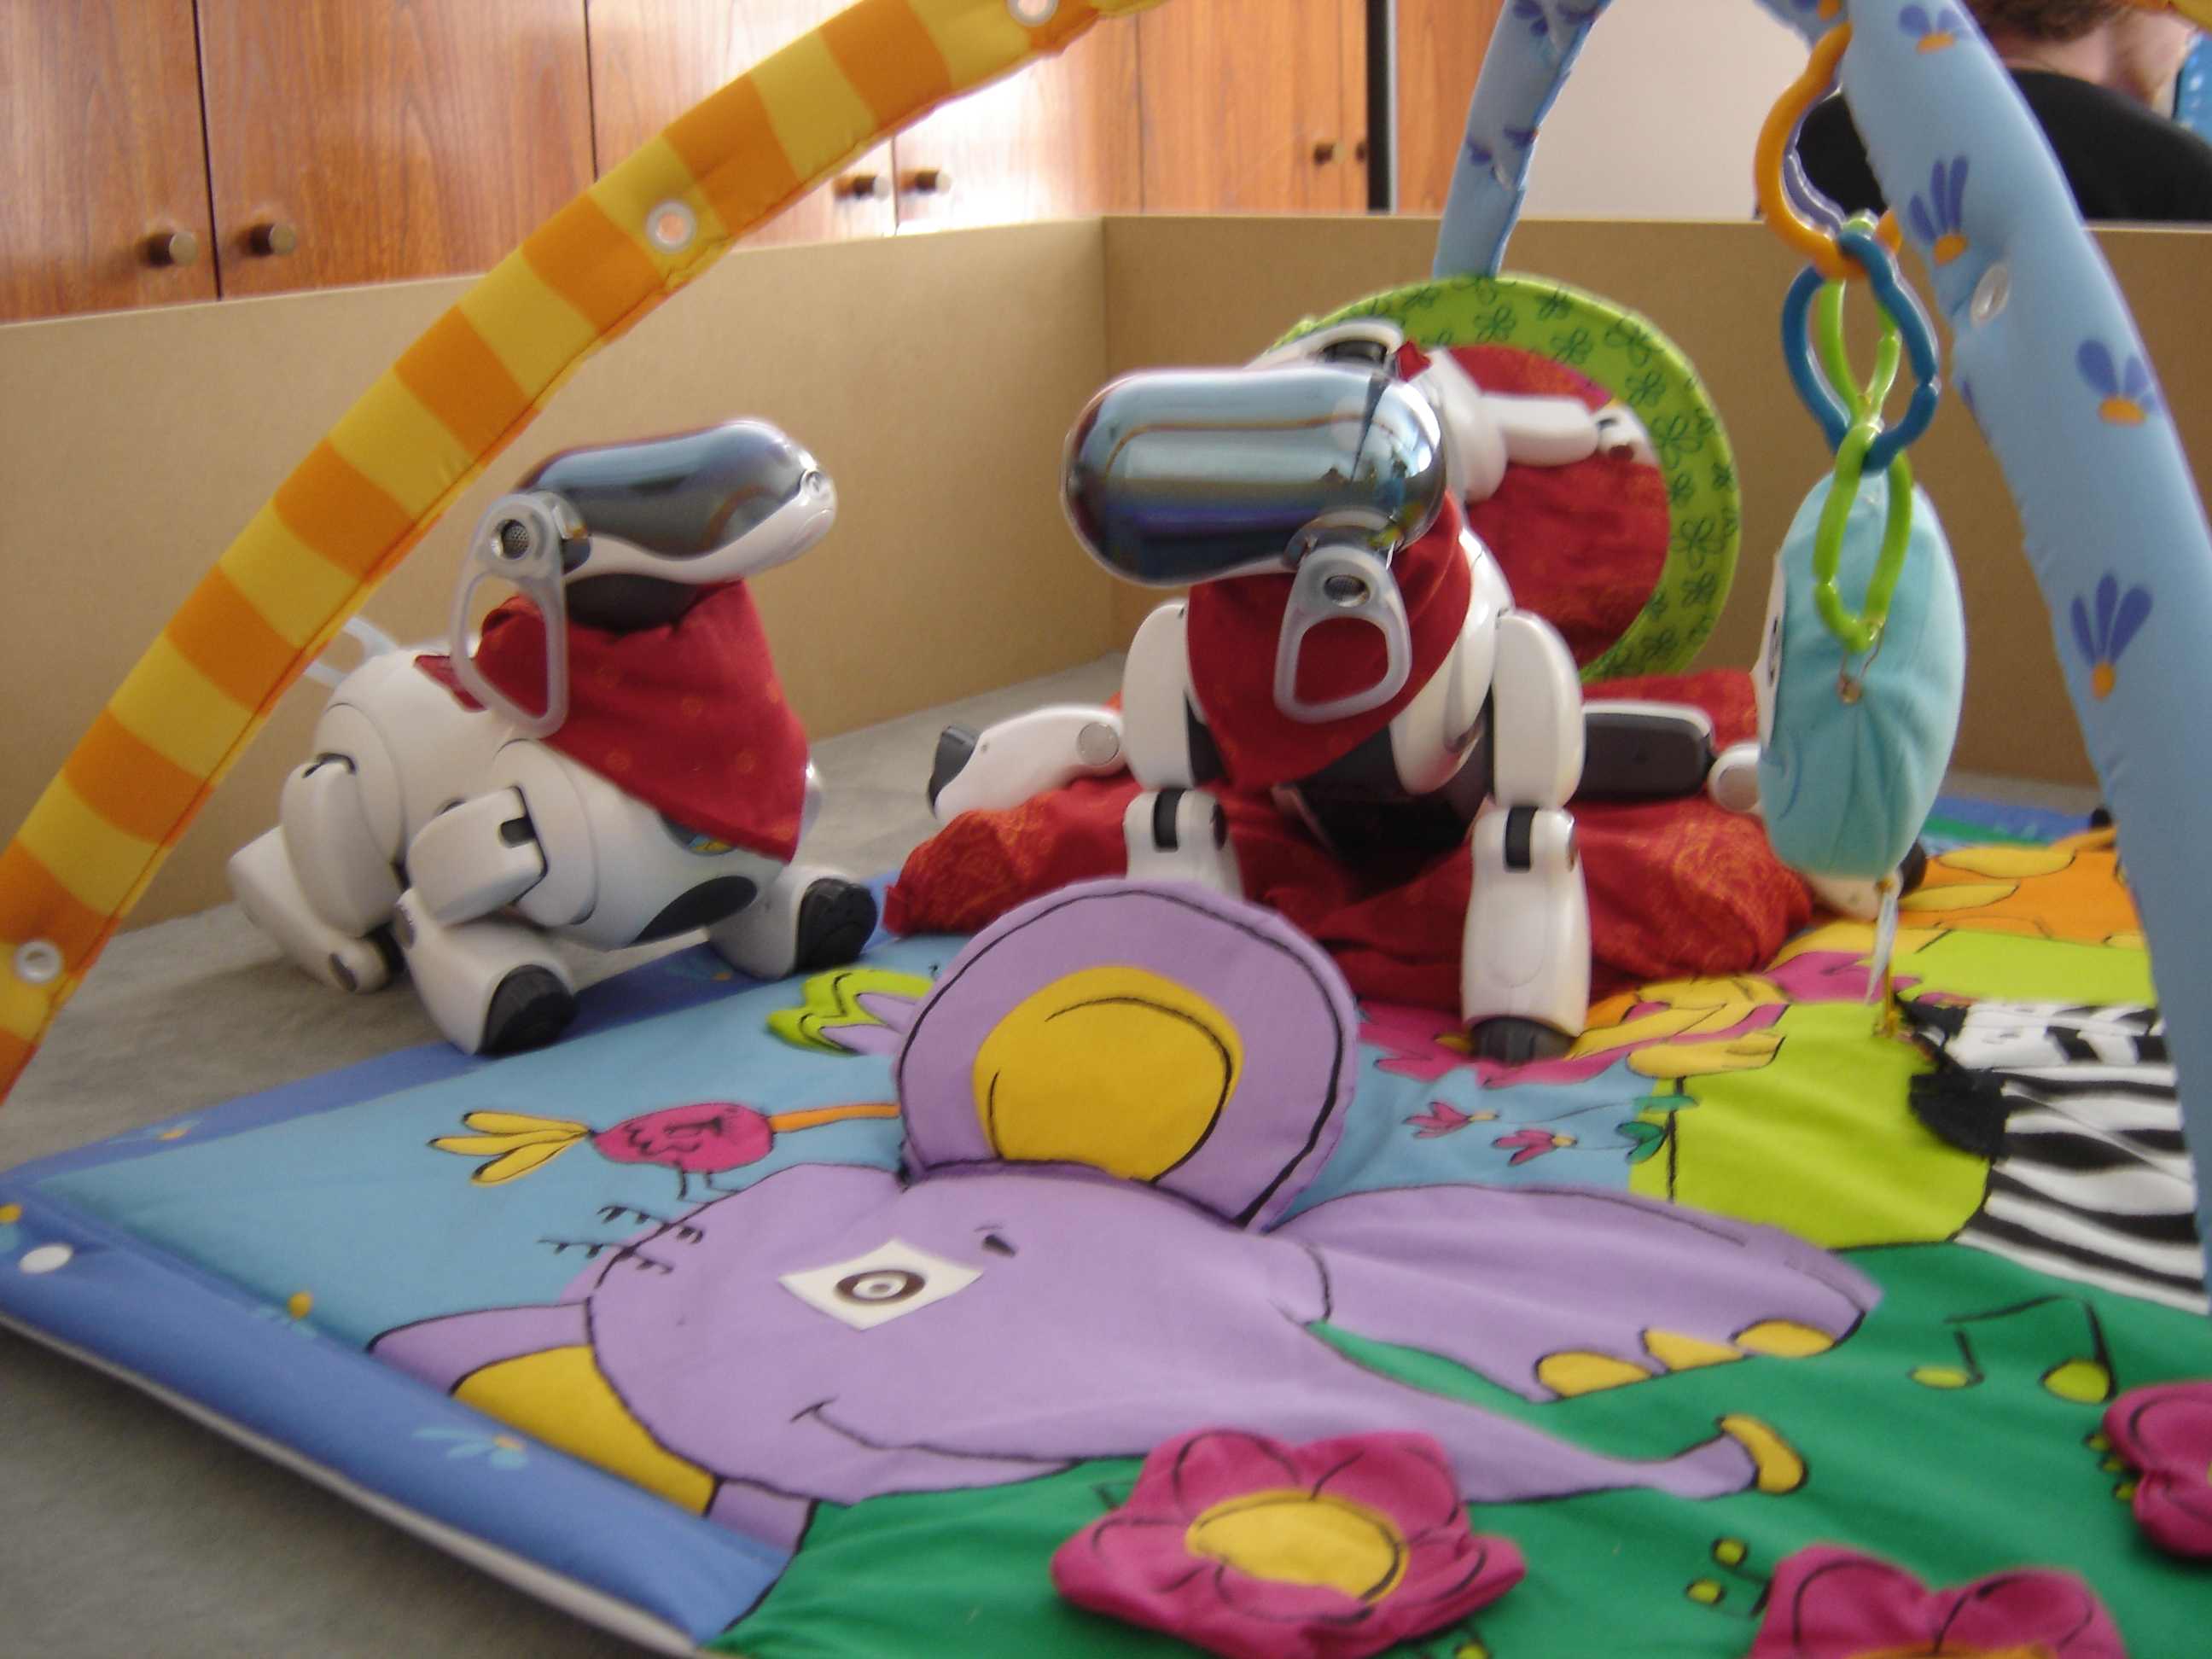  The Playground Experiment: a quadruped robot explores and learn physical and social affordances through curiosity-driven learning.